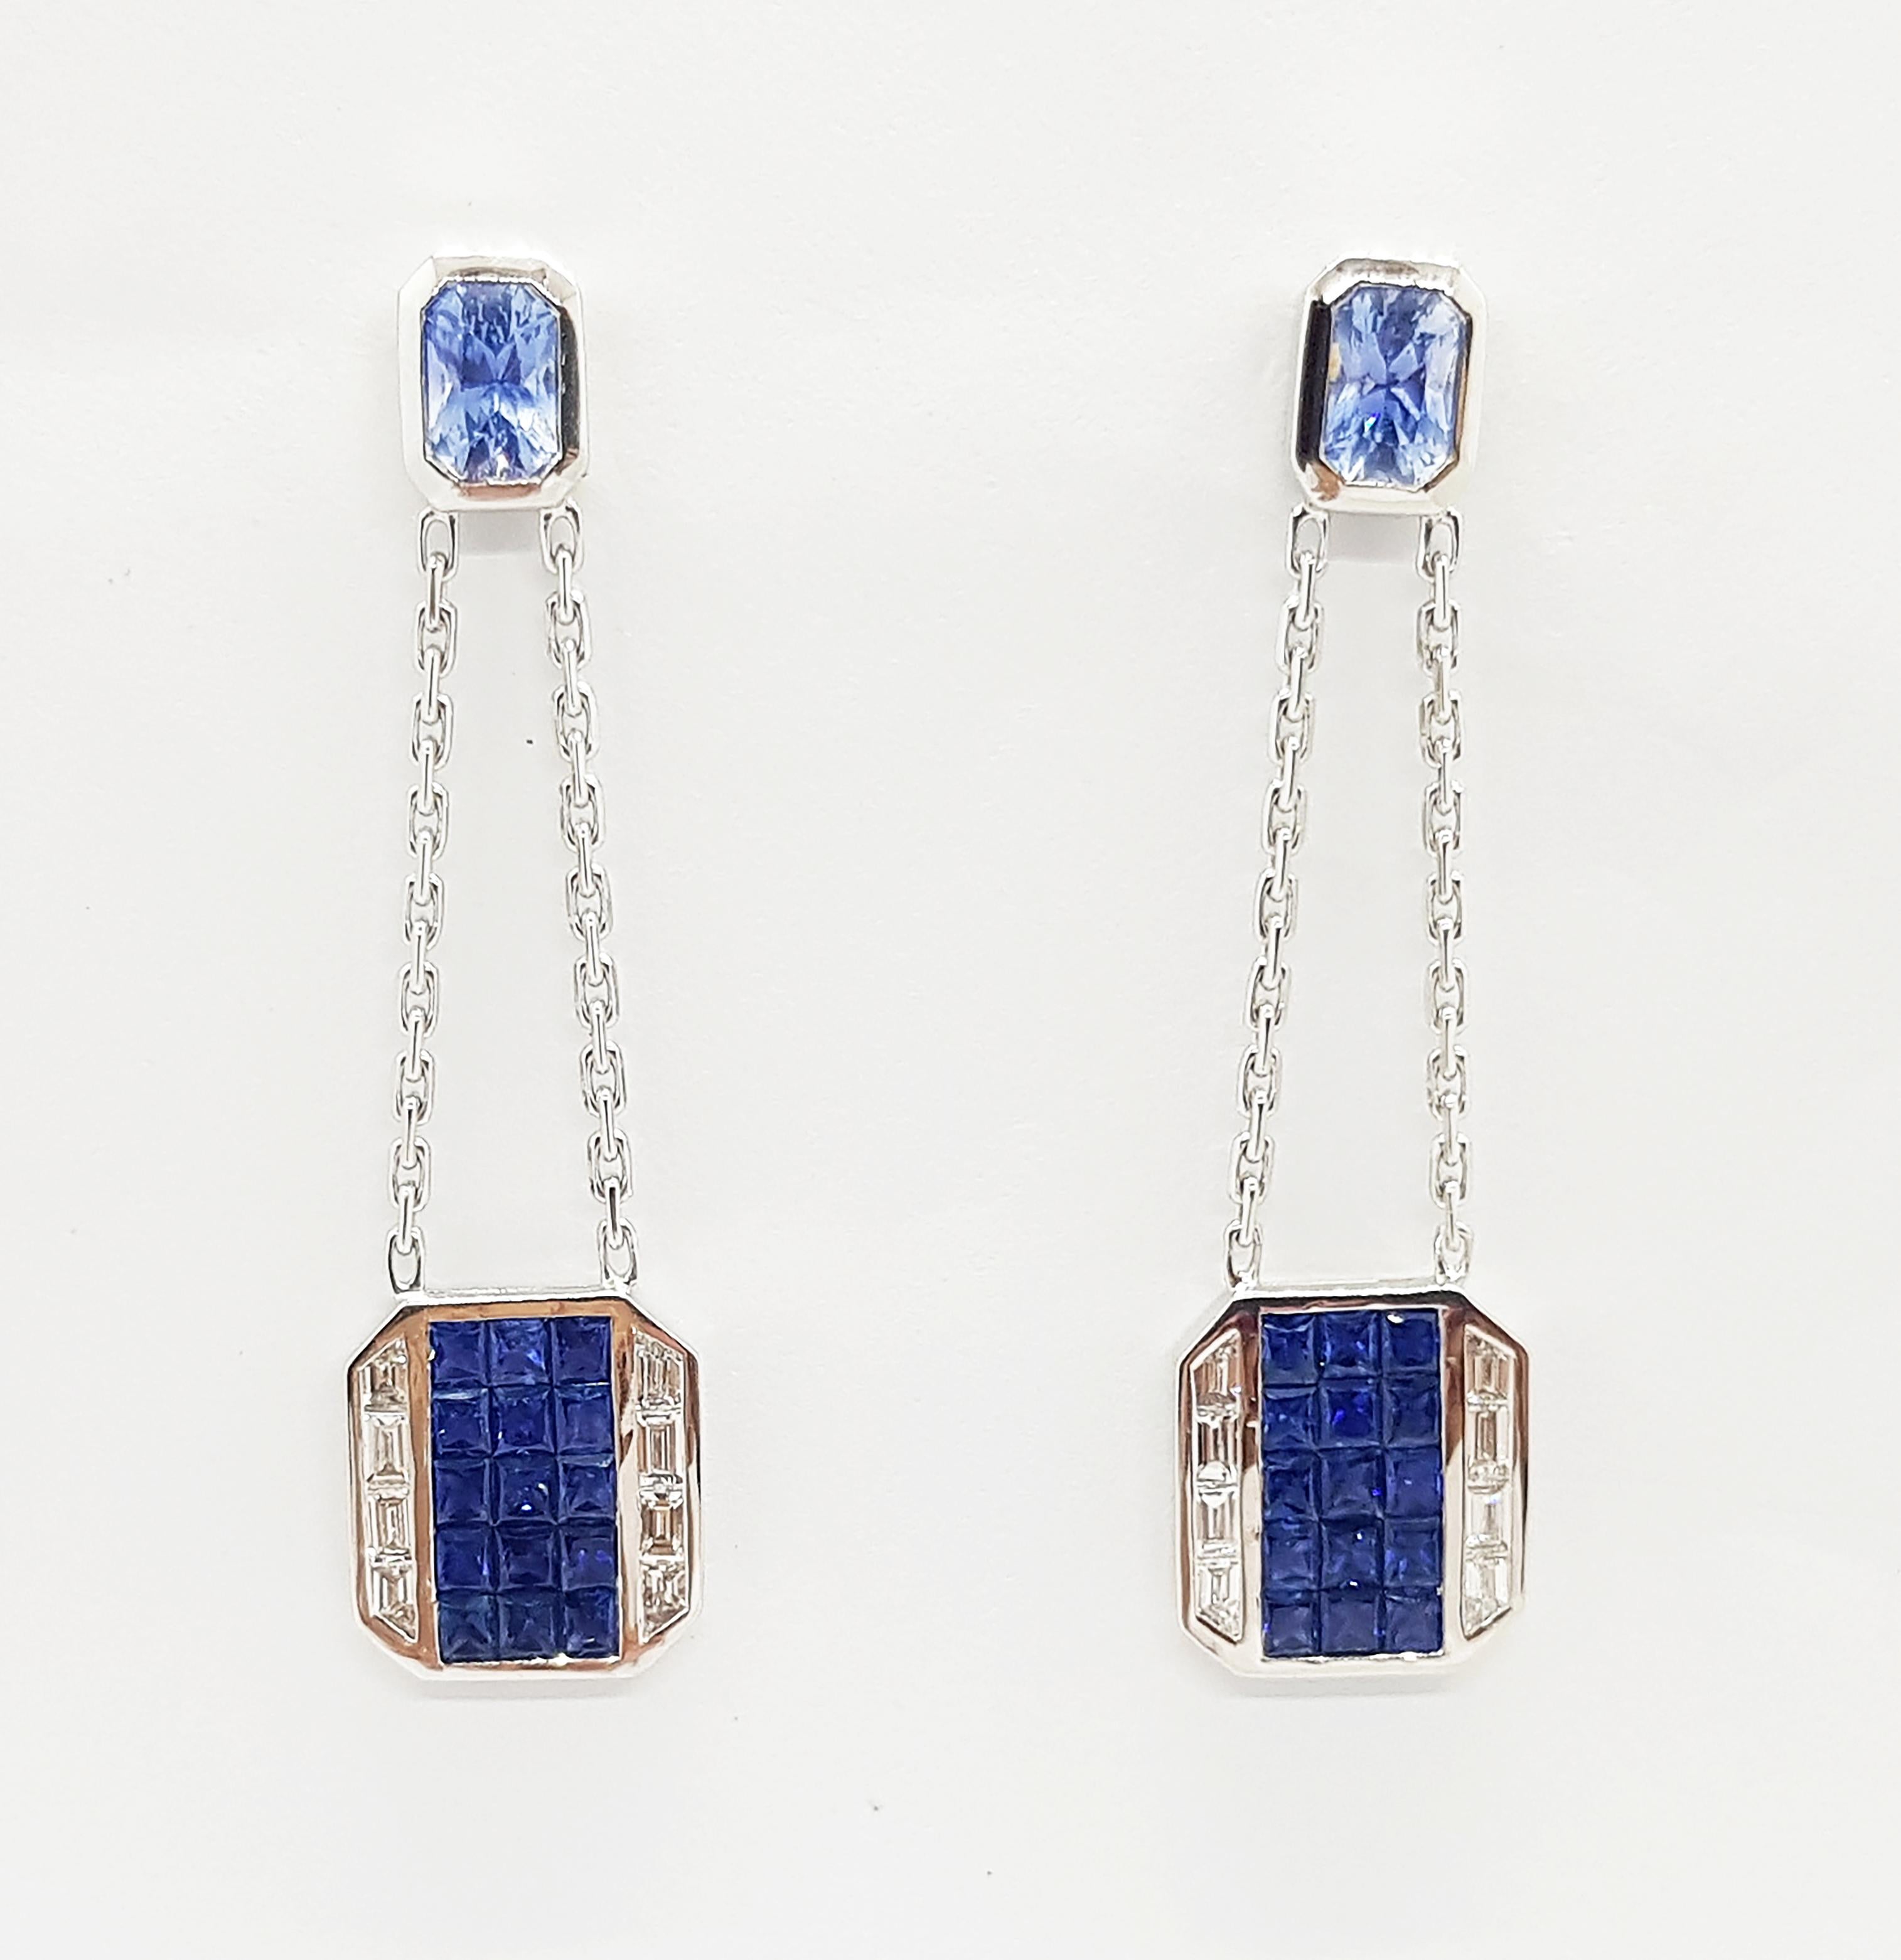 Blue Sapphire 4.78 carats with Diamond 0.74 carat Earrings set in 18 Karat White Gold Settings

Width:  1.3 cm 
Length:  4.8 cm
Total Weight: 9.97 grams

FOUNDED BY AWARD-WINNING COUPLE, NUTTAPON (KENNY) & SHAR-LINN, KAVANT & SHARART IS A FINE